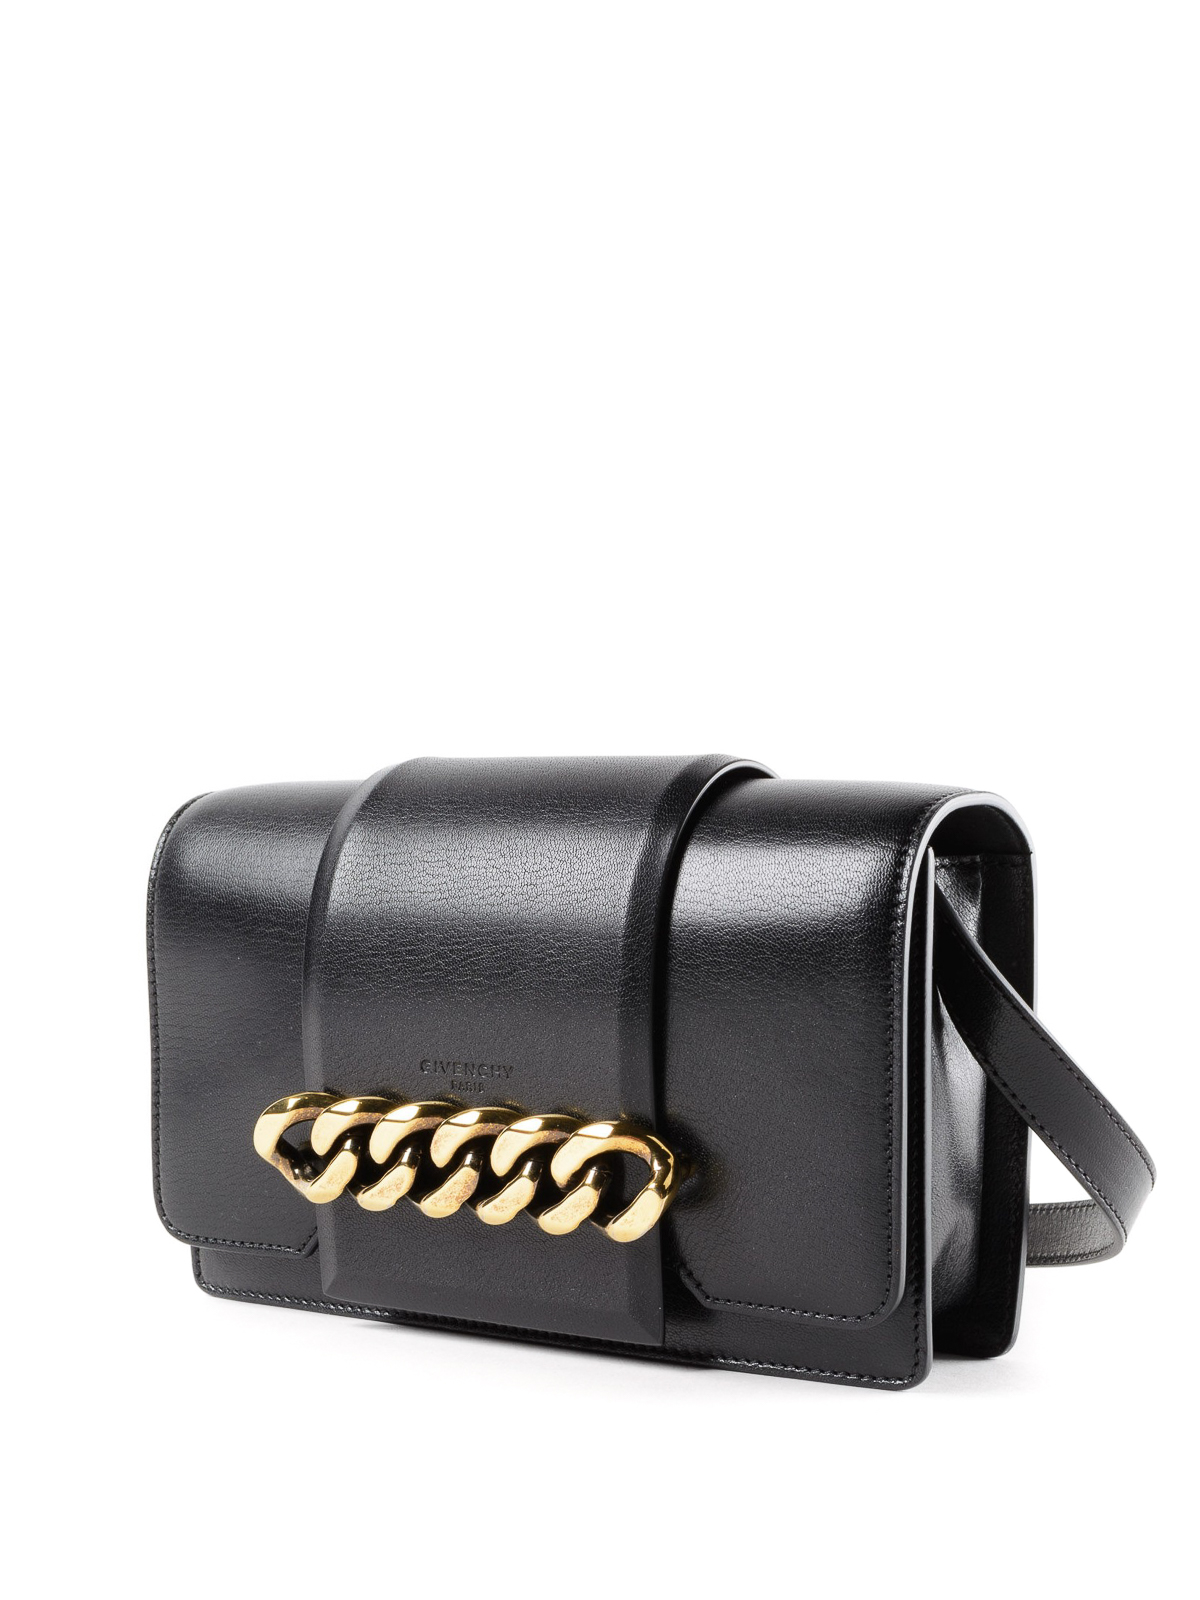 givenchy infinity chain shoulder bag